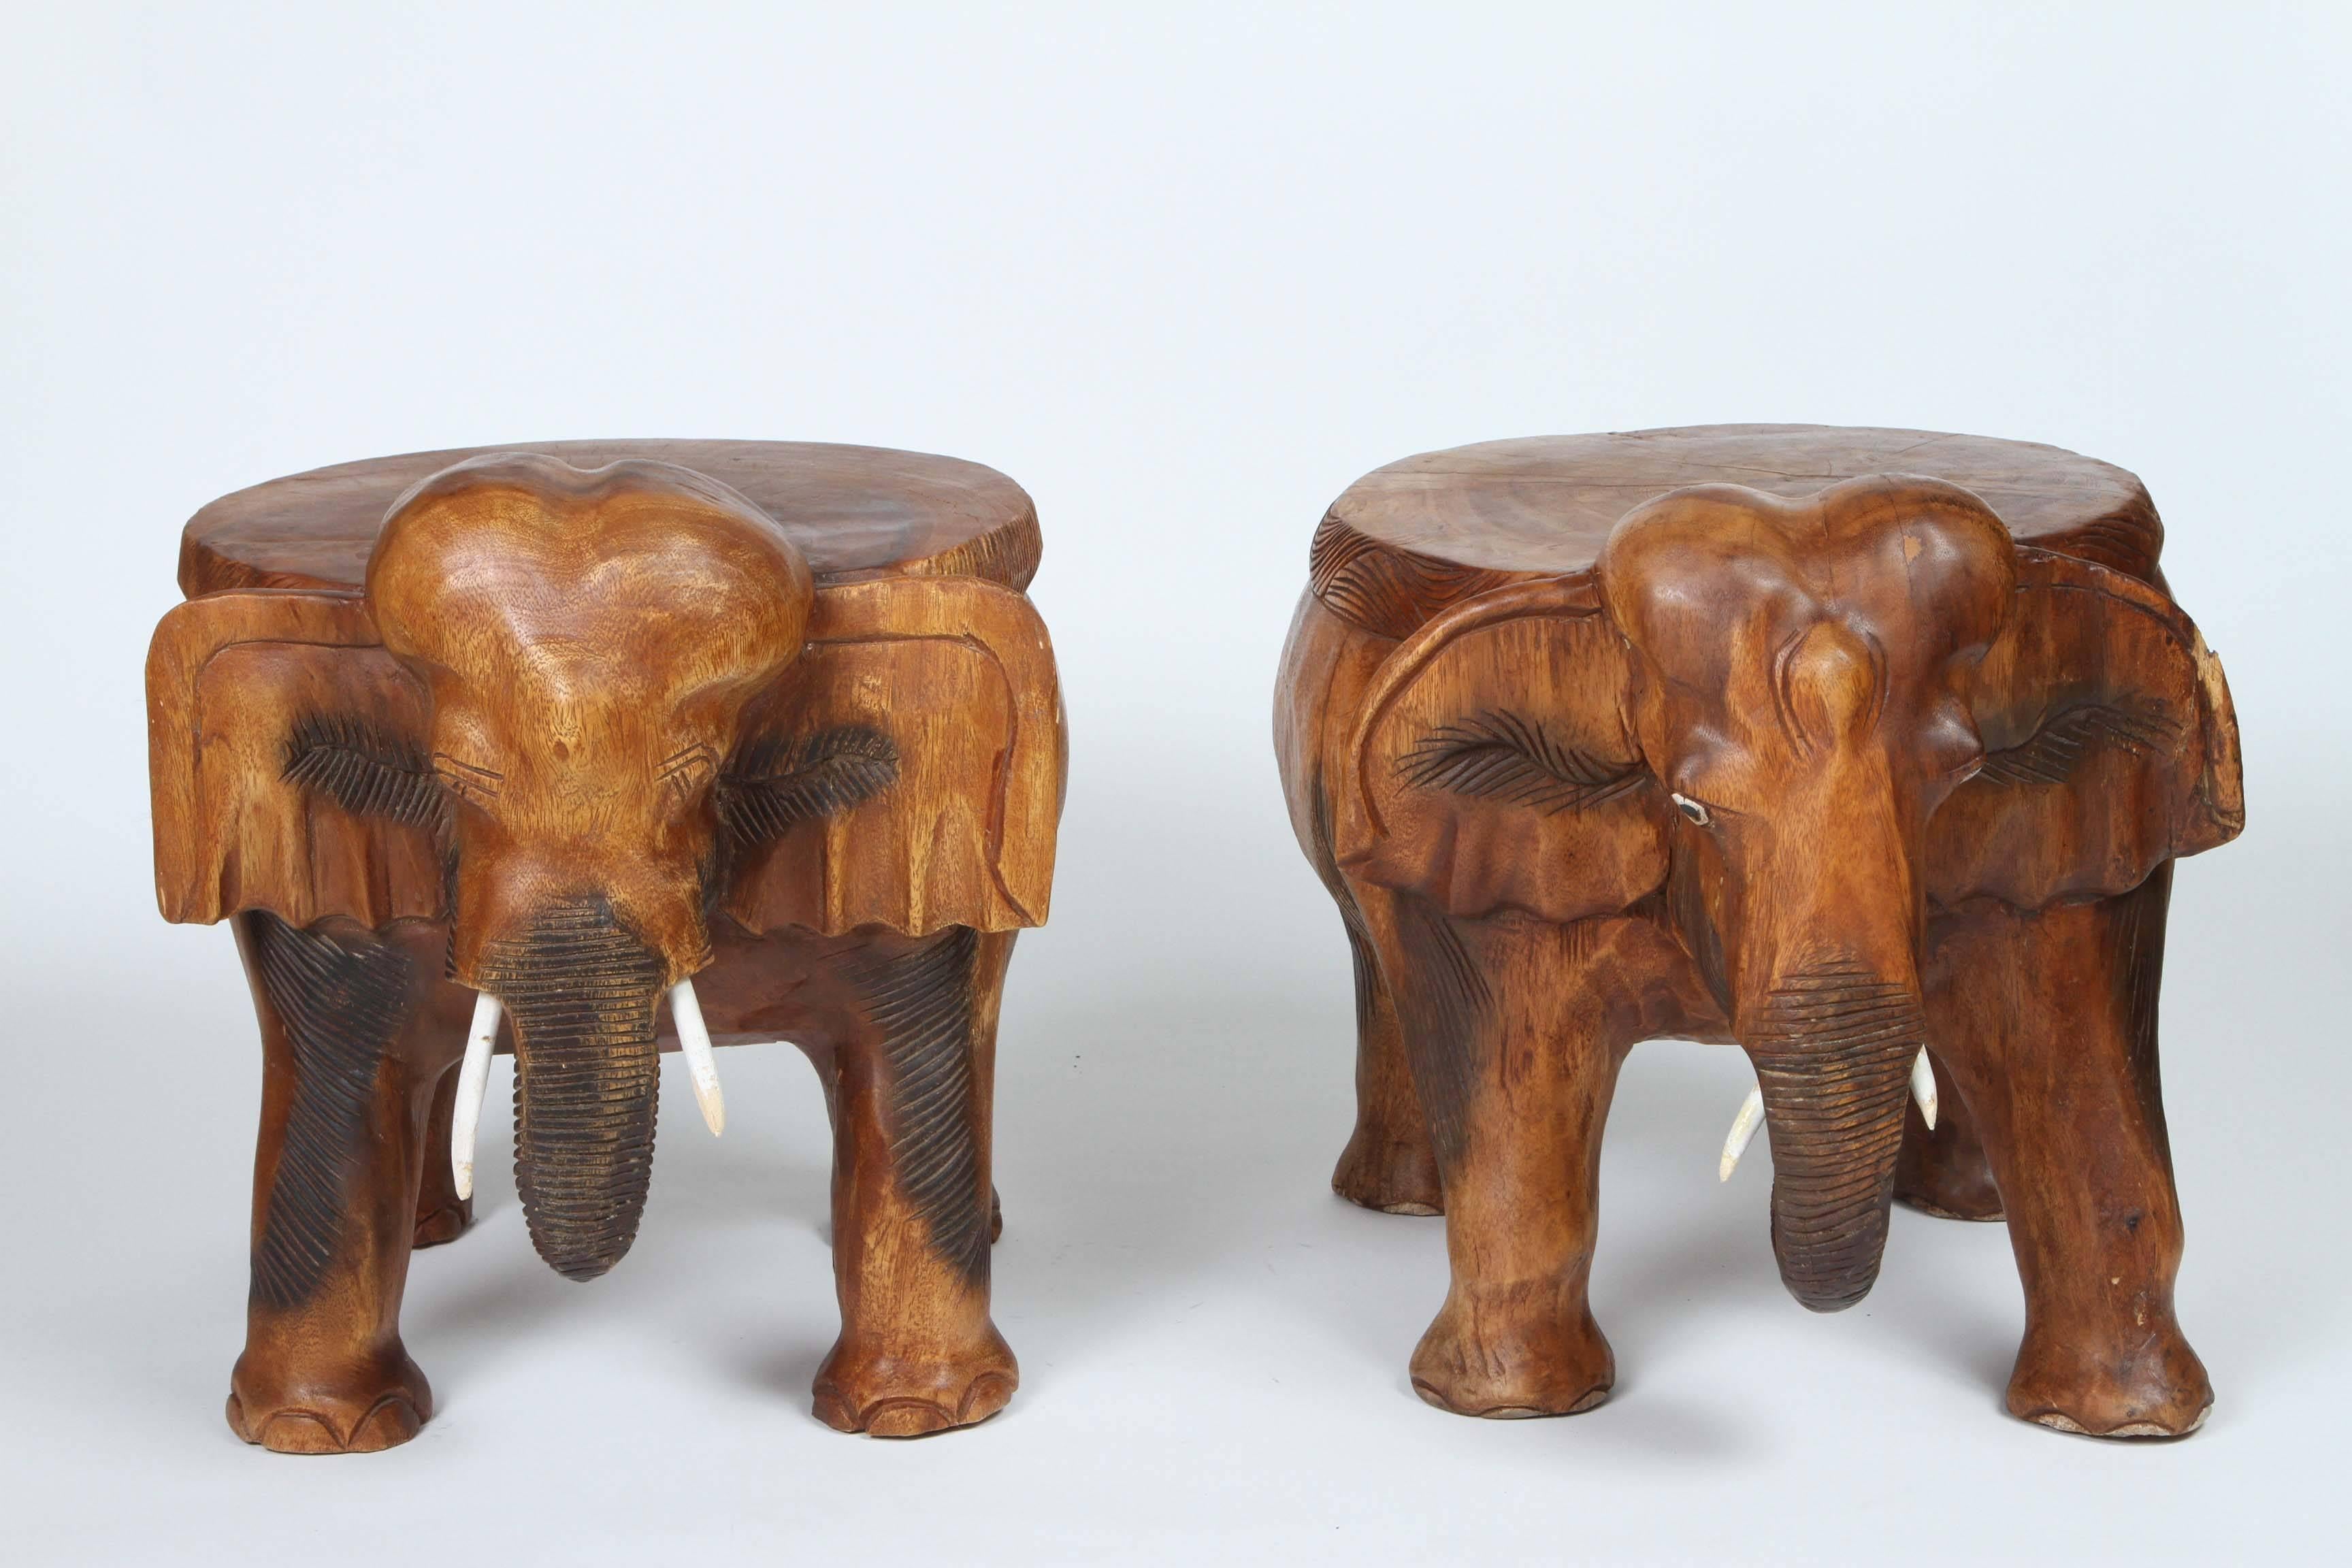 Pair of vintage carved wood elephant stools or tables.